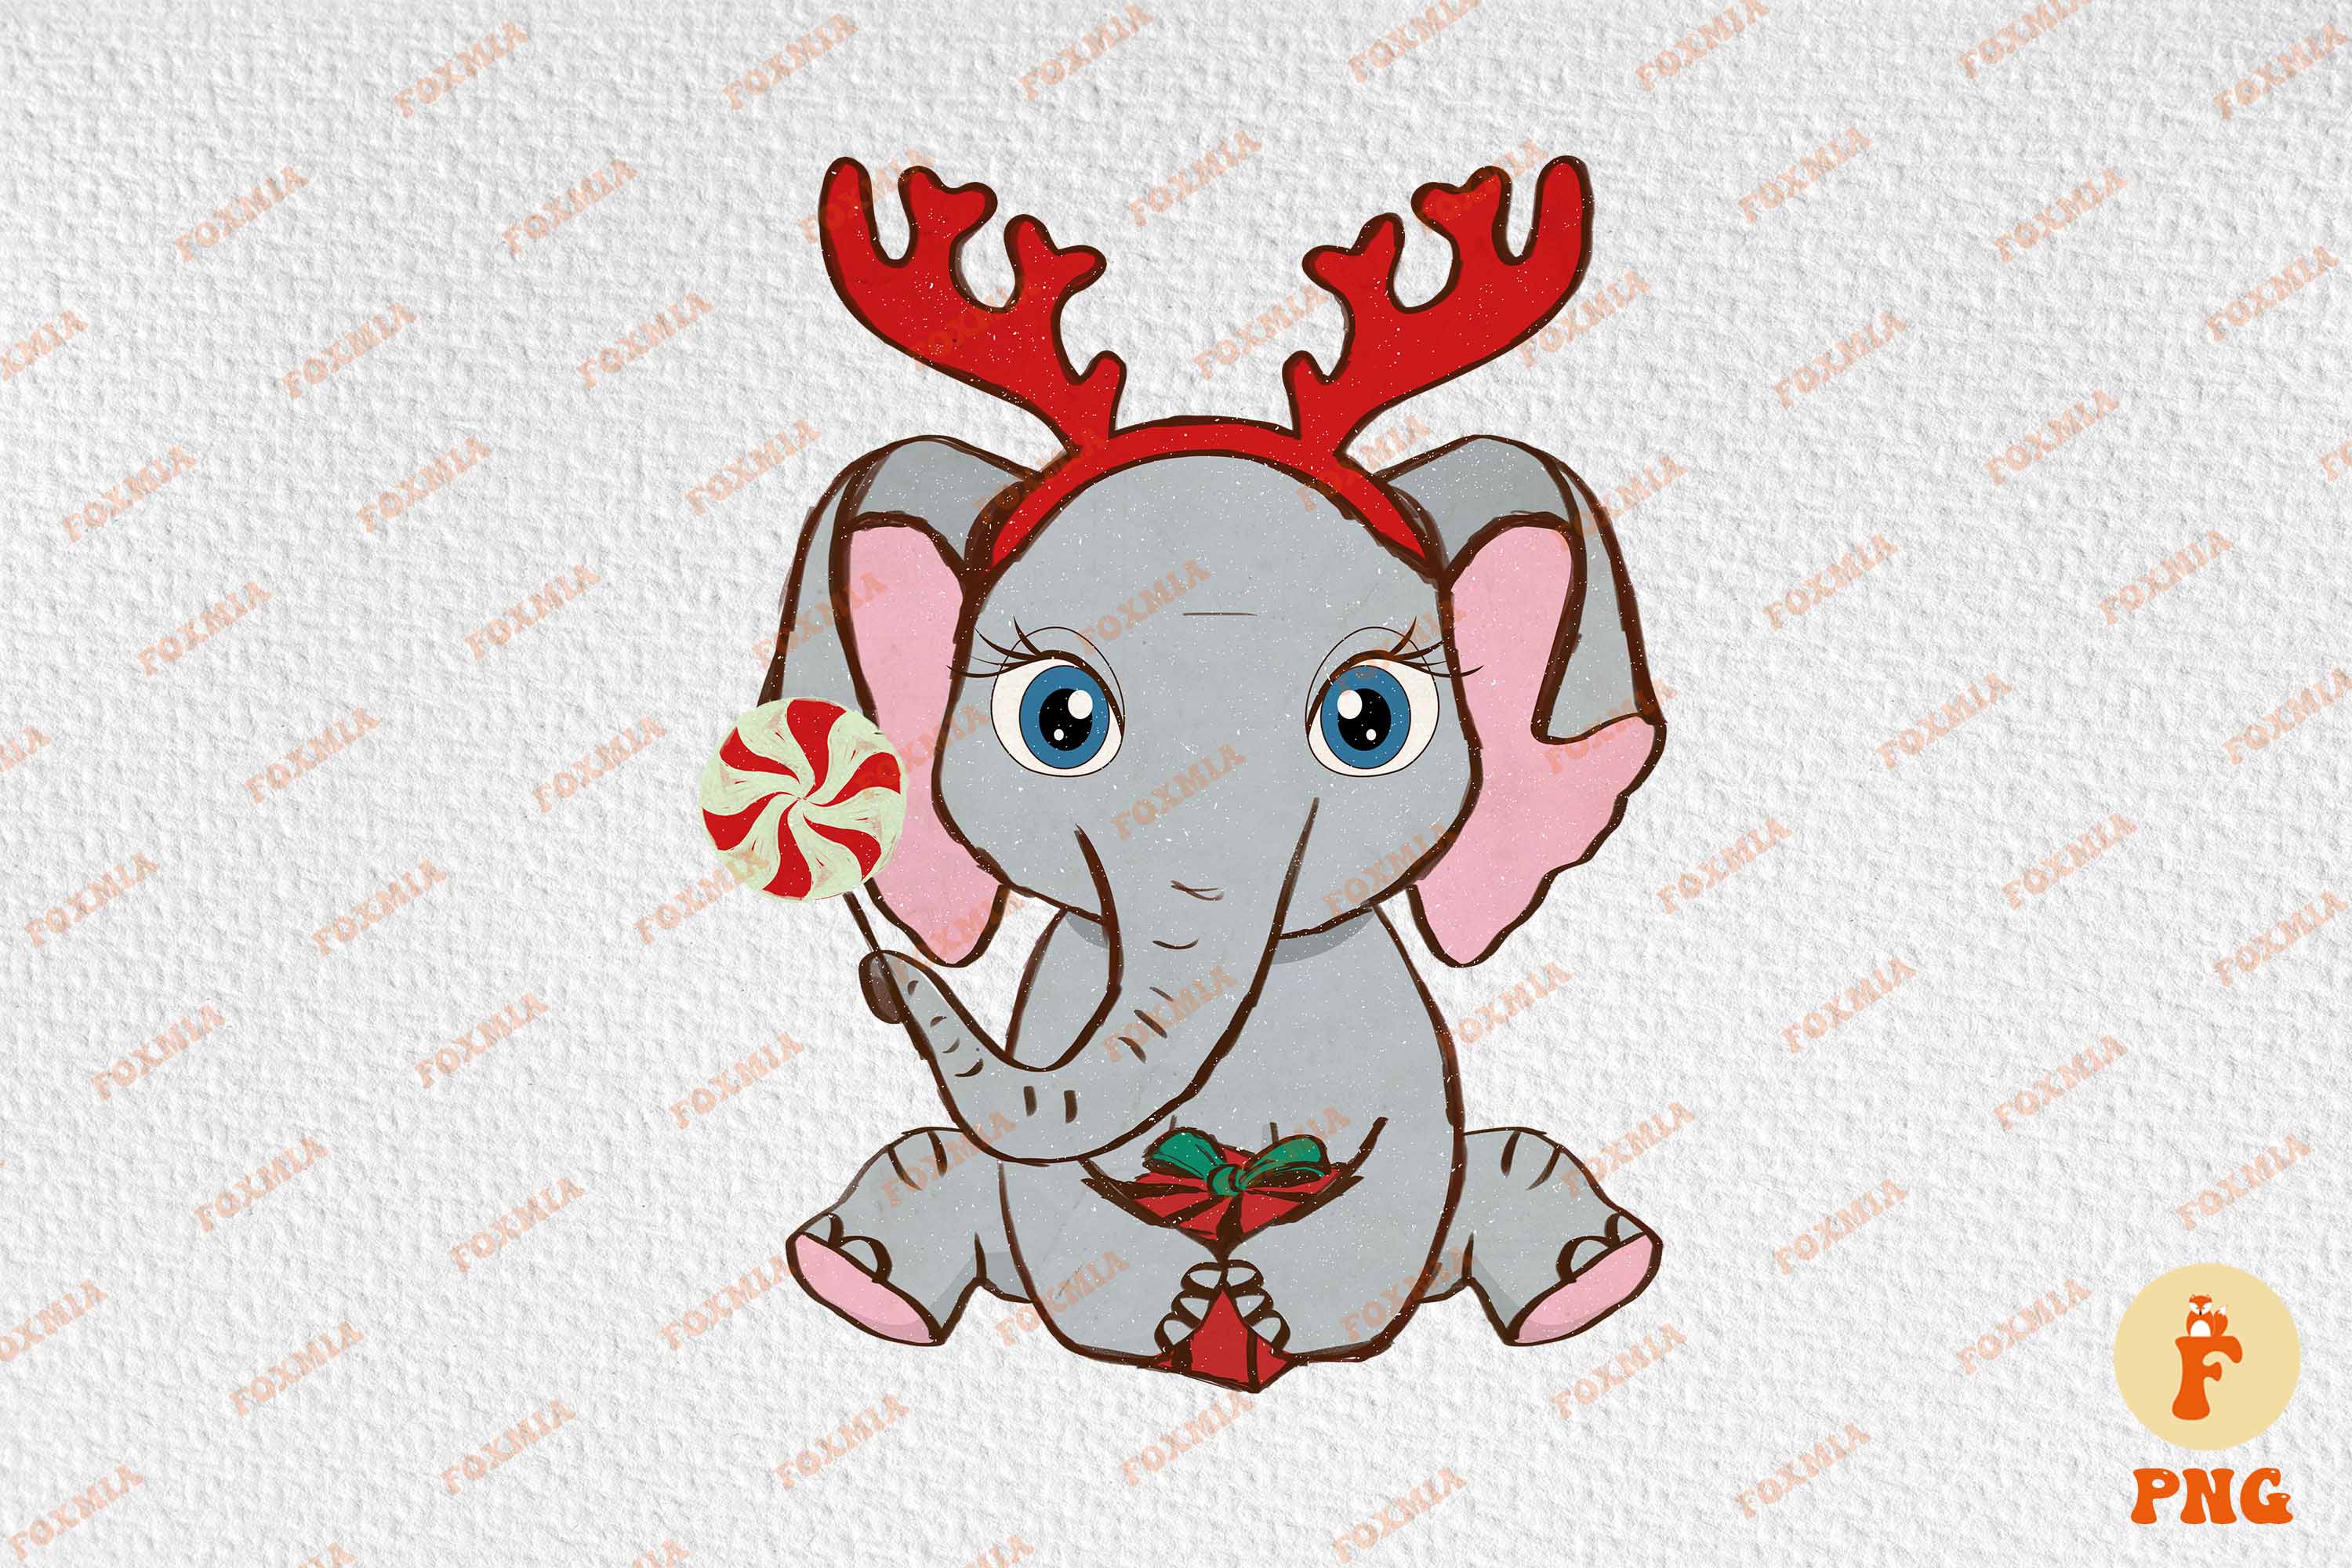 Adorable image with an elephant with deer antlers.